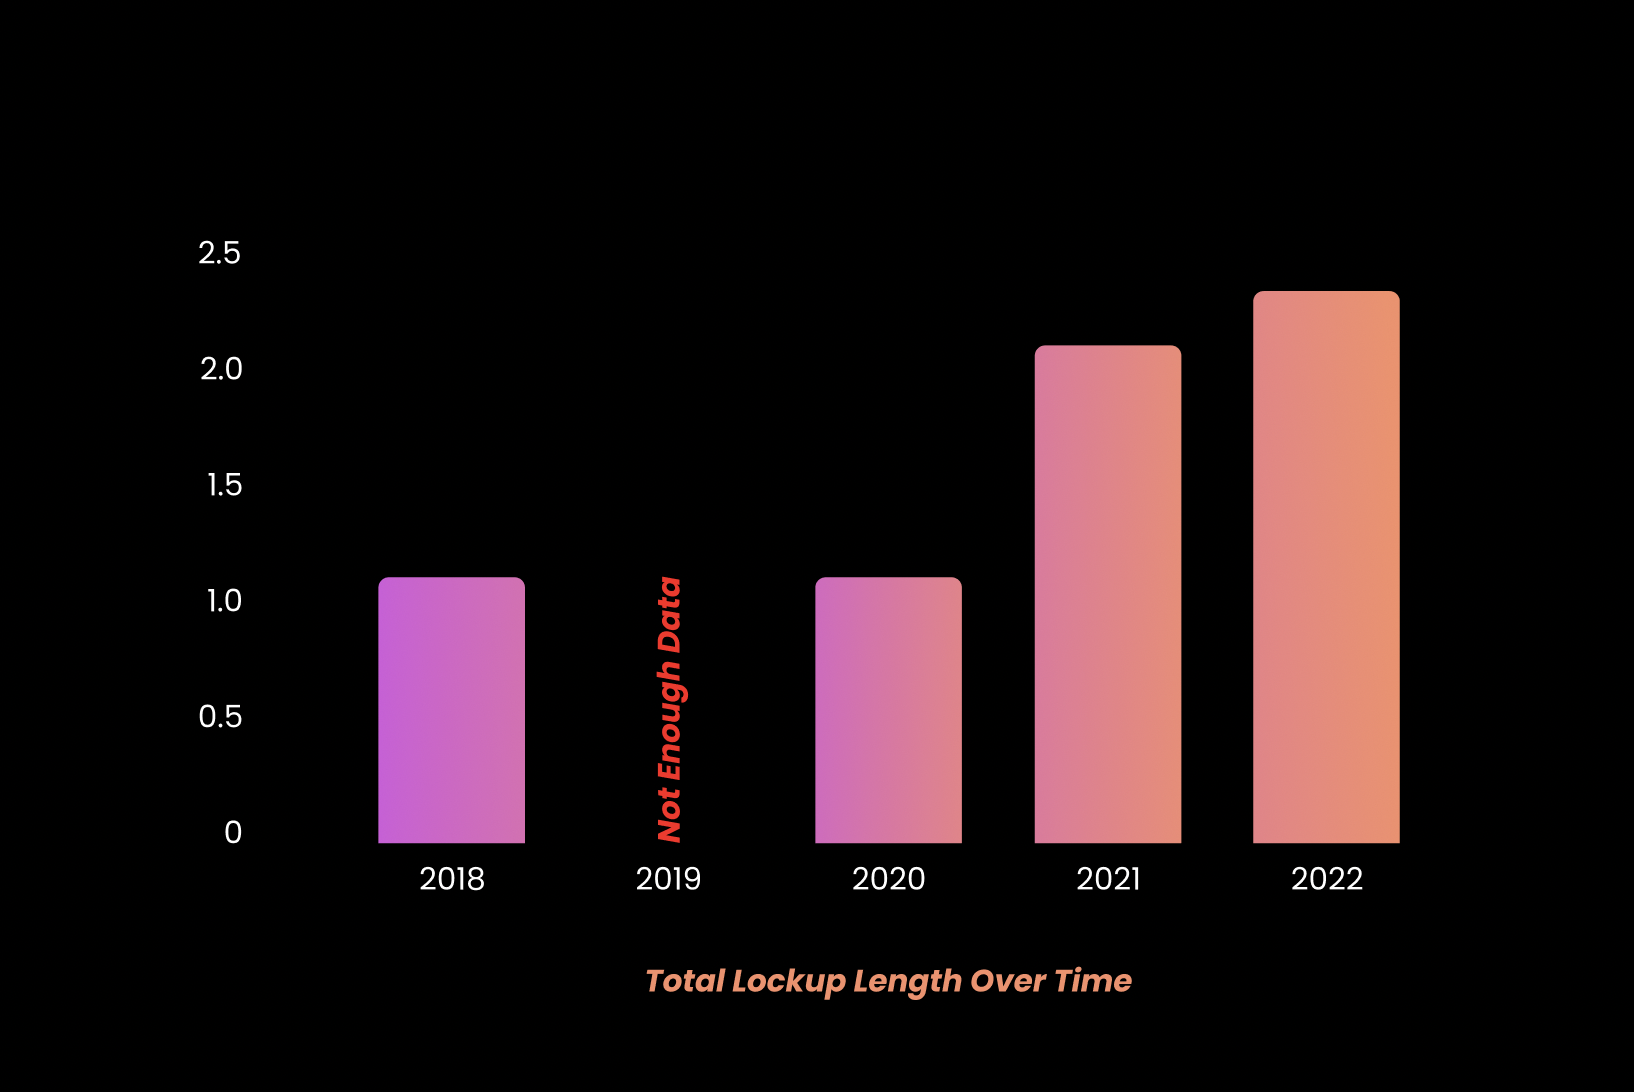 Lockup length has been increasing over time